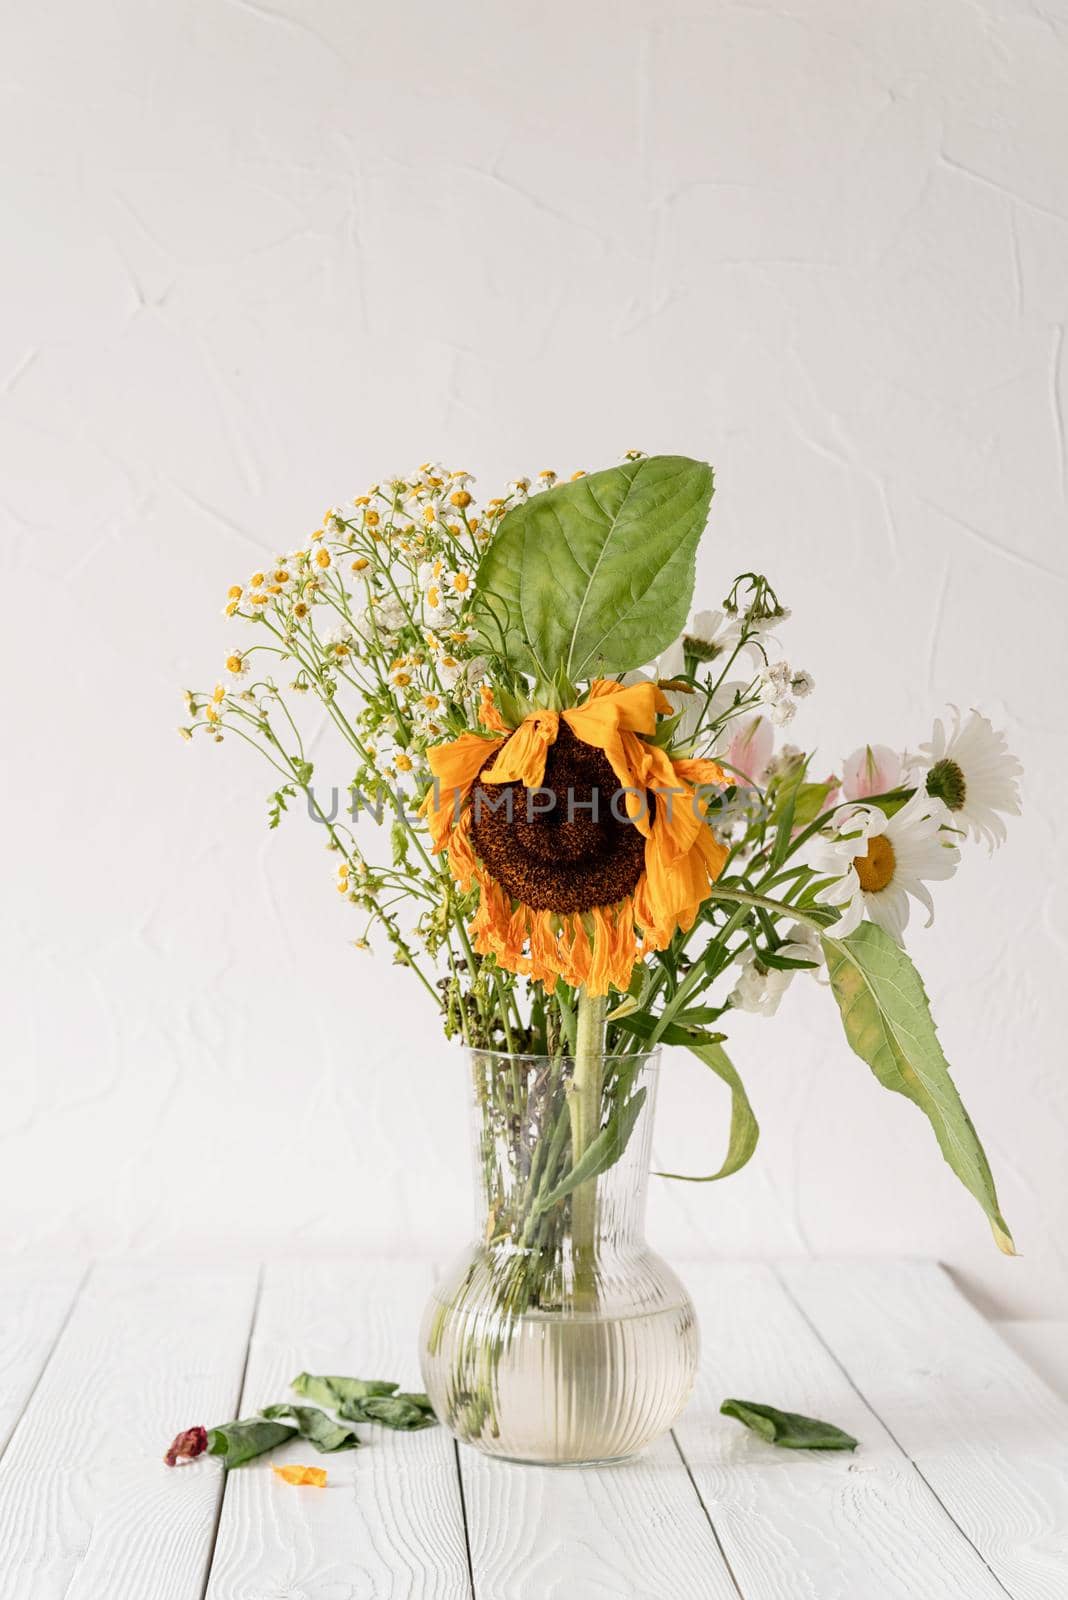 Autumn concept. A bouquet of withered dry flowers and a sunflower in a vase